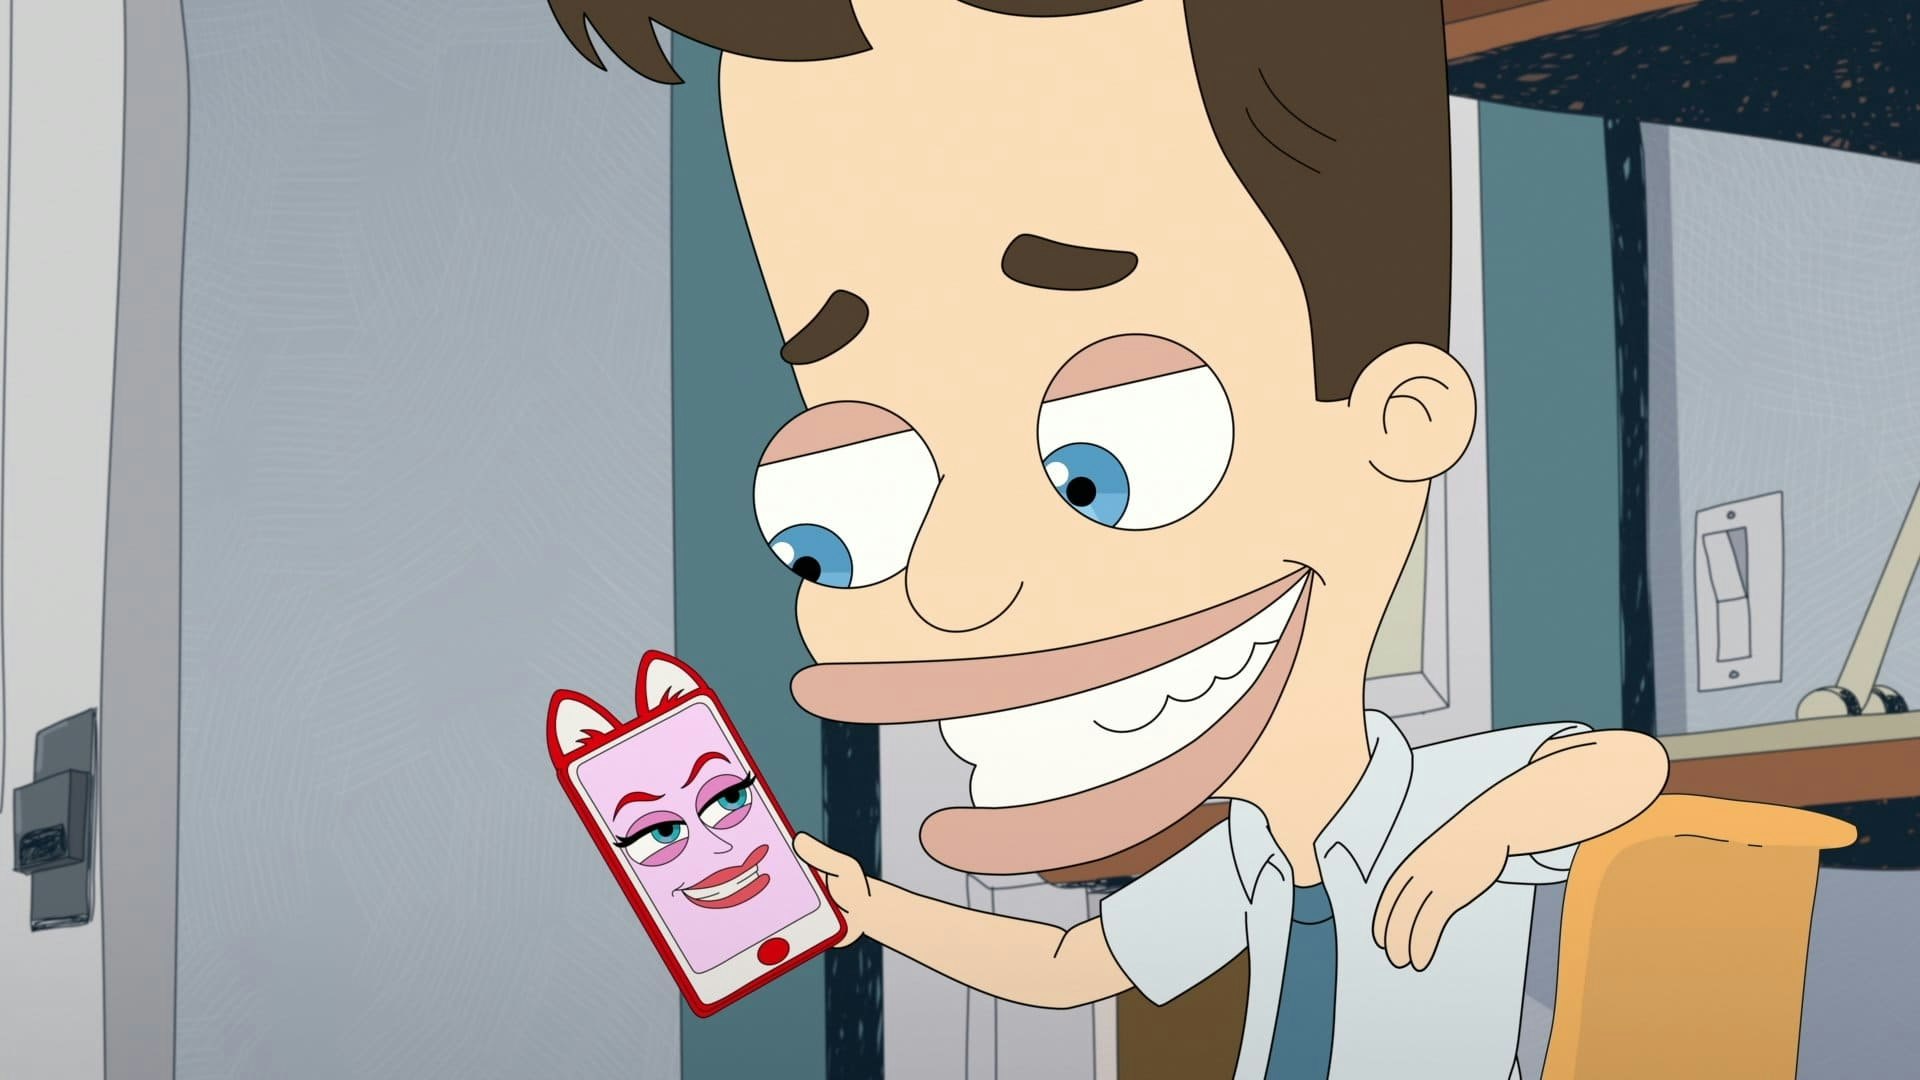 Big Mouth' Season 4 release date, plot, characters, and more